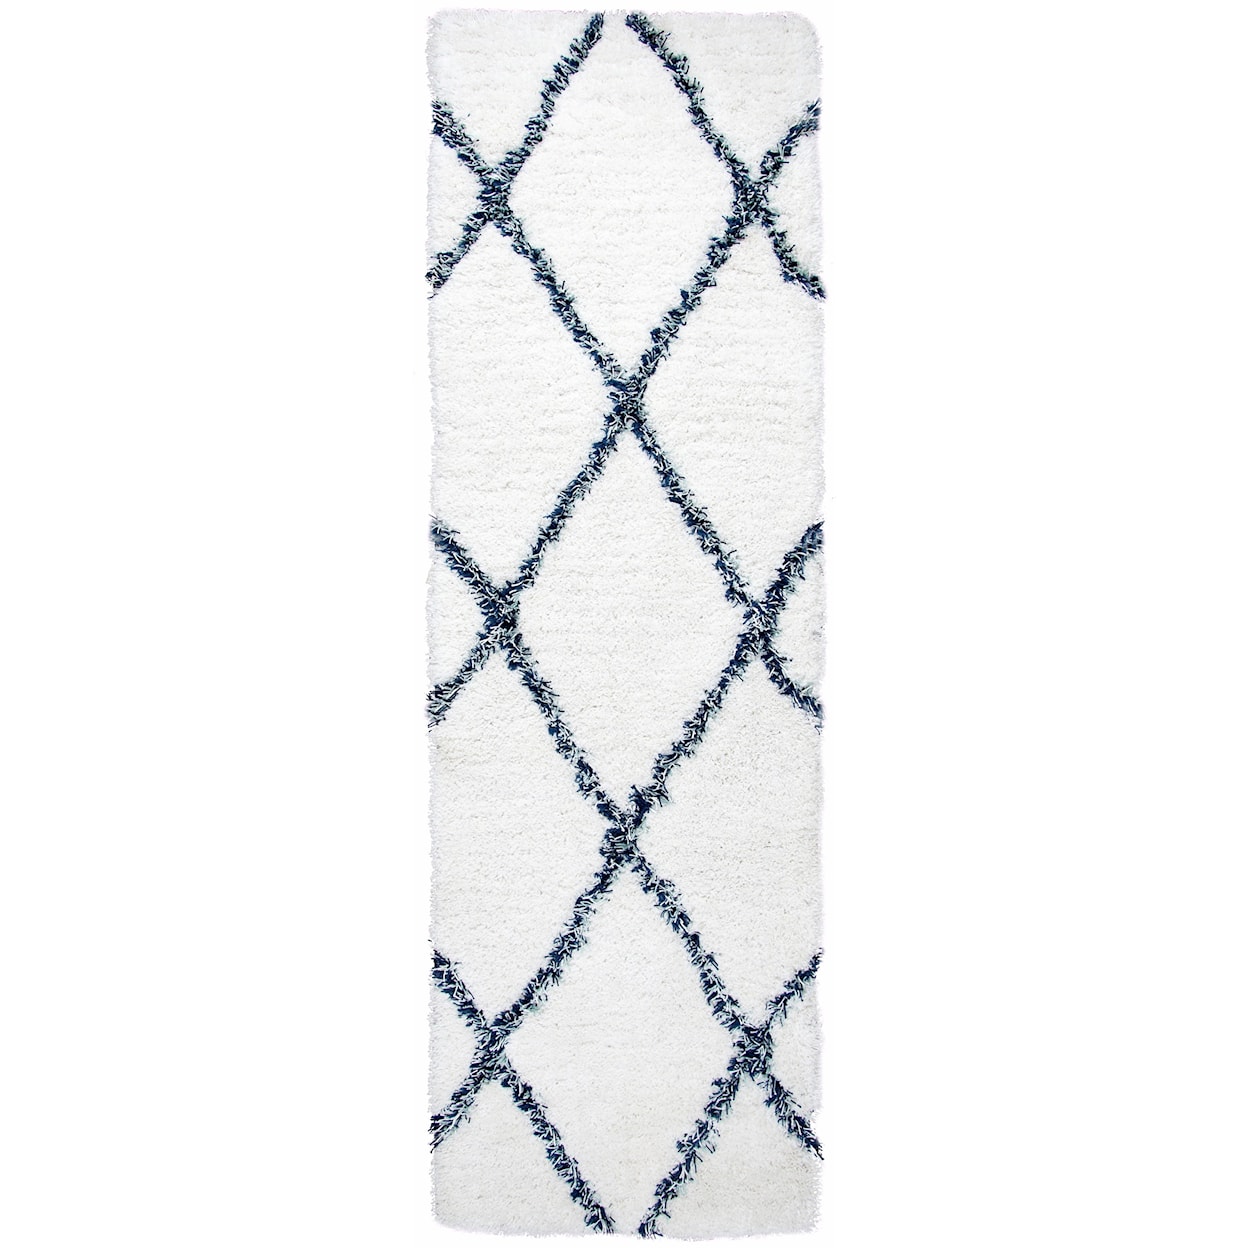 Rizzy Home Connex 2'6" x 8' Runner Rug